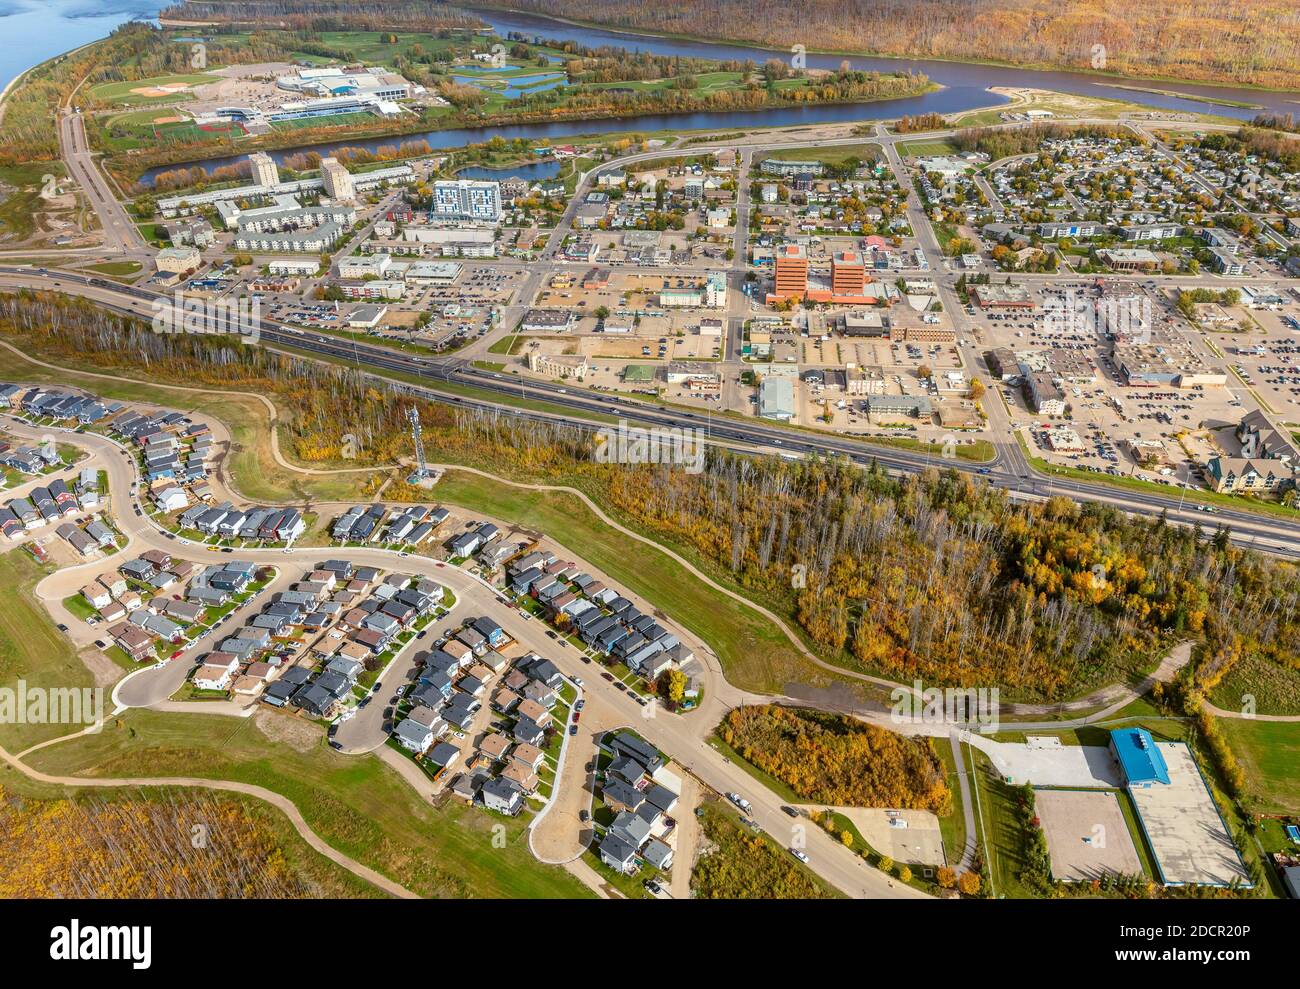 Aerial photo of downtown Fort McMurray, Alberta Canada with MacDonald Island Park in the background and Hilltop Estates residential area in the foregr Stock Photo